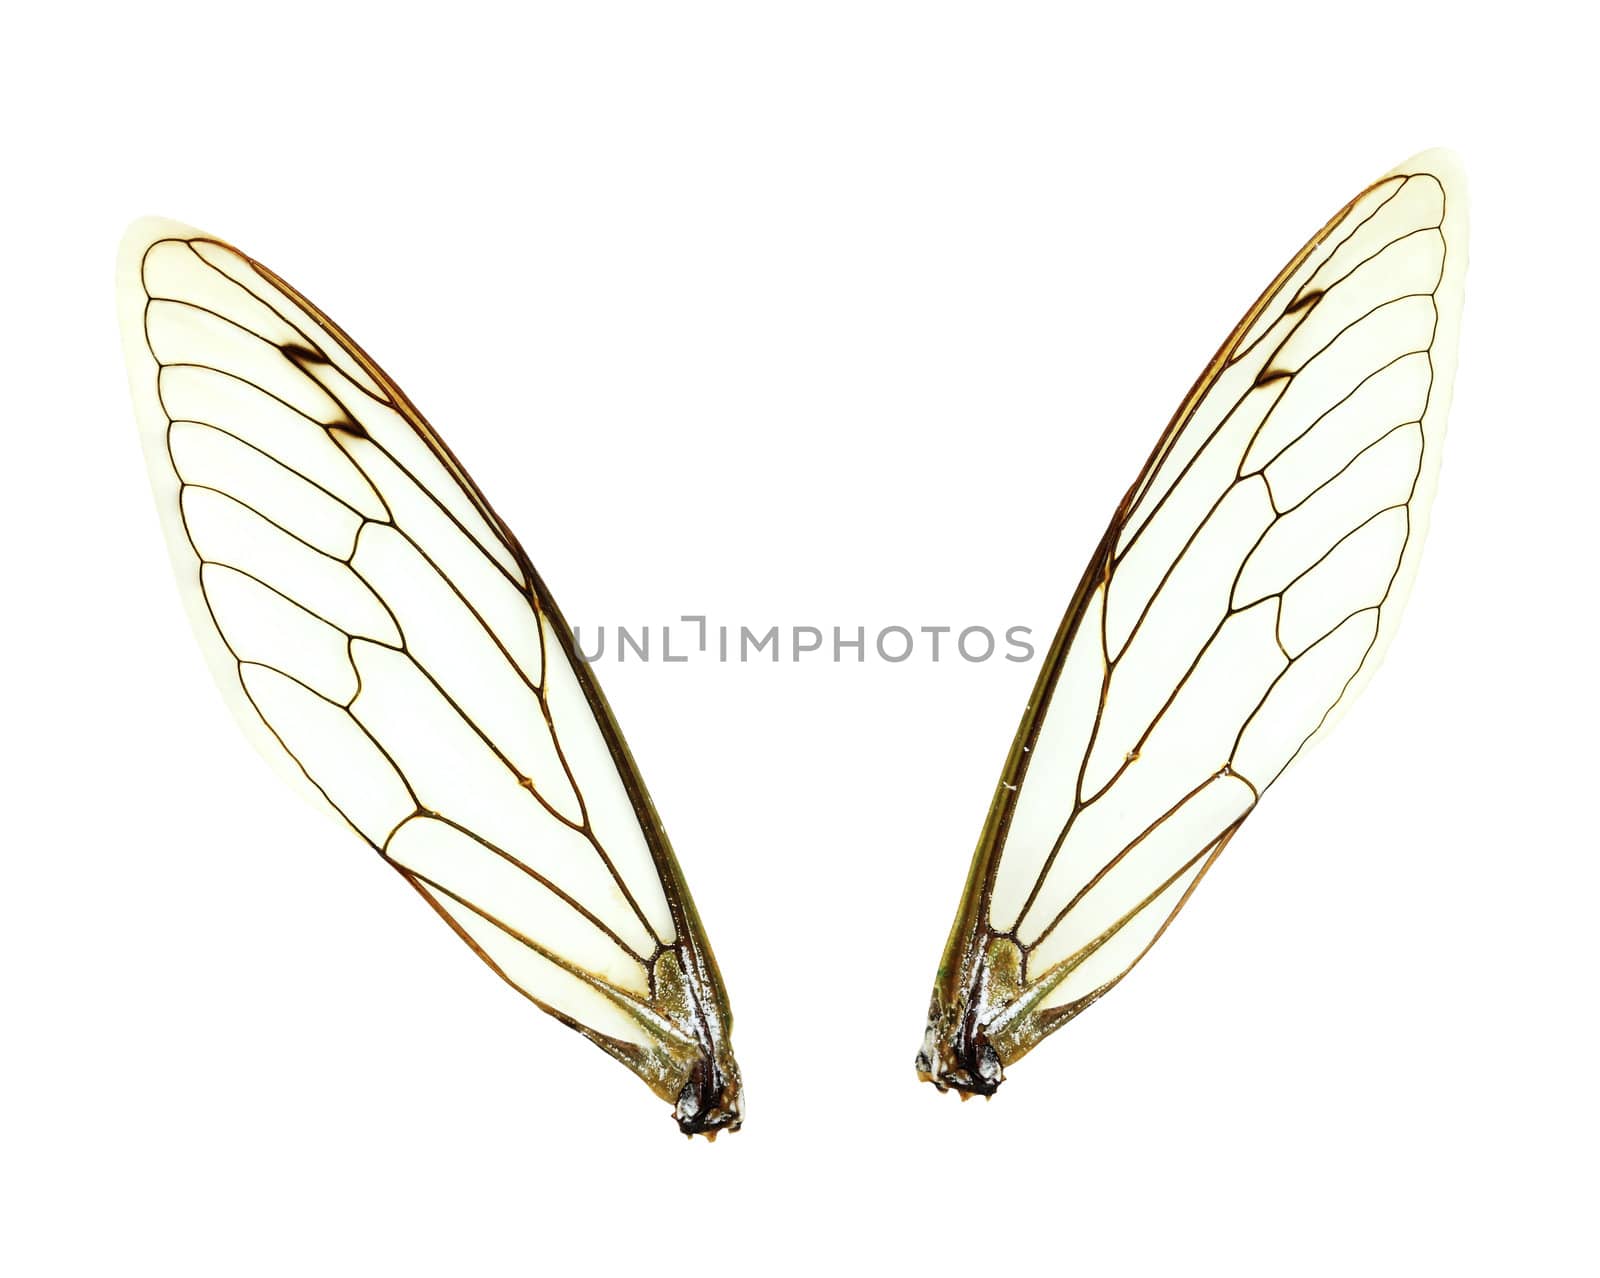 Two seperate Cicada (Jar FLy) wings isolated over a white background with clipping path included.